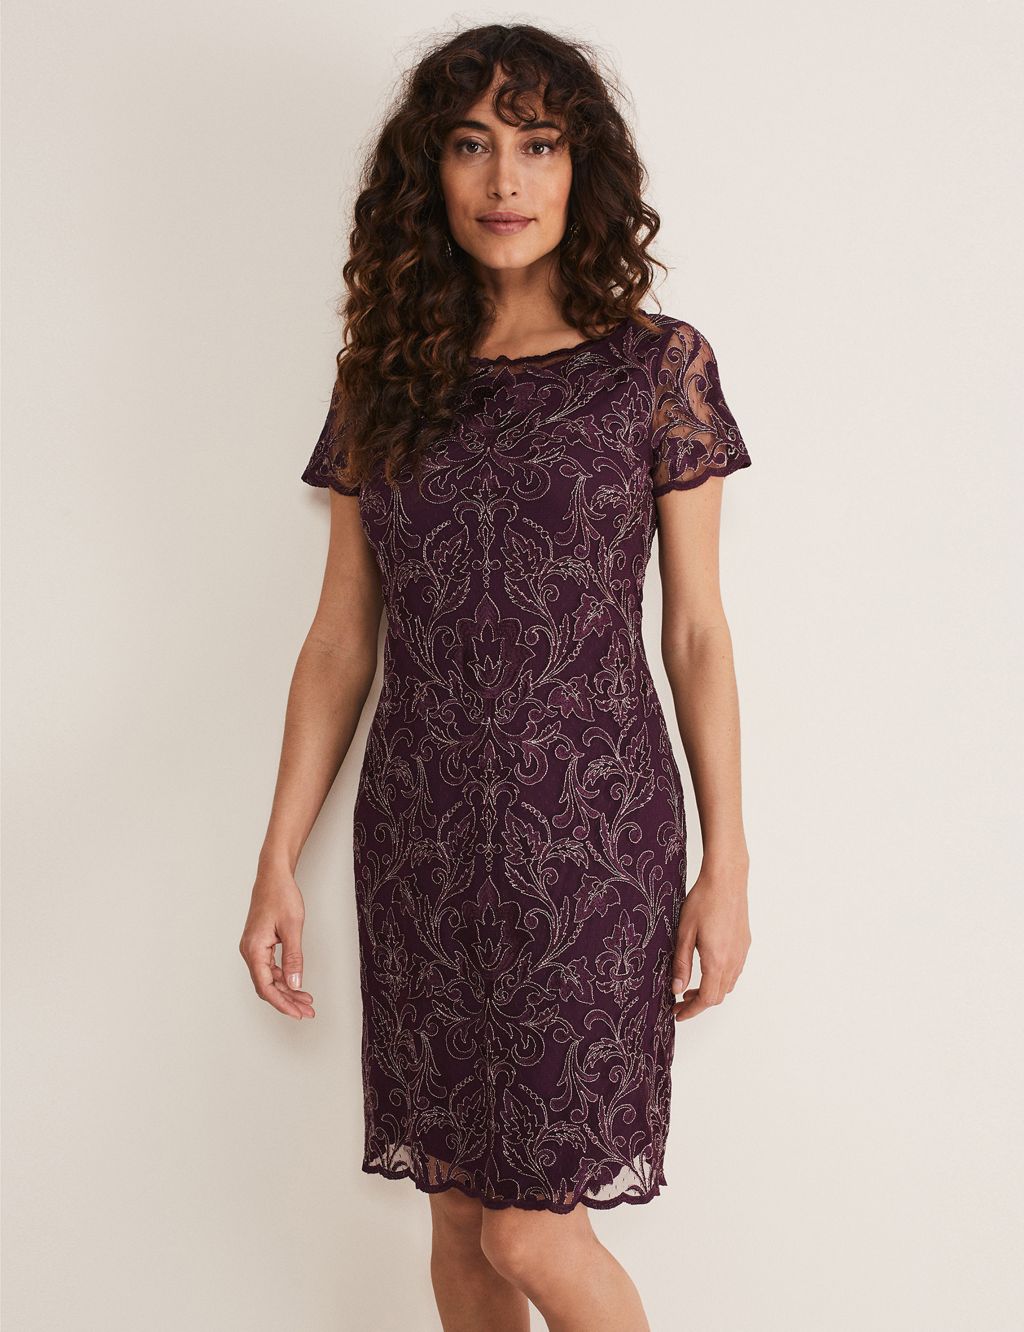 Embroidered Round Neck Shift Dress image 1